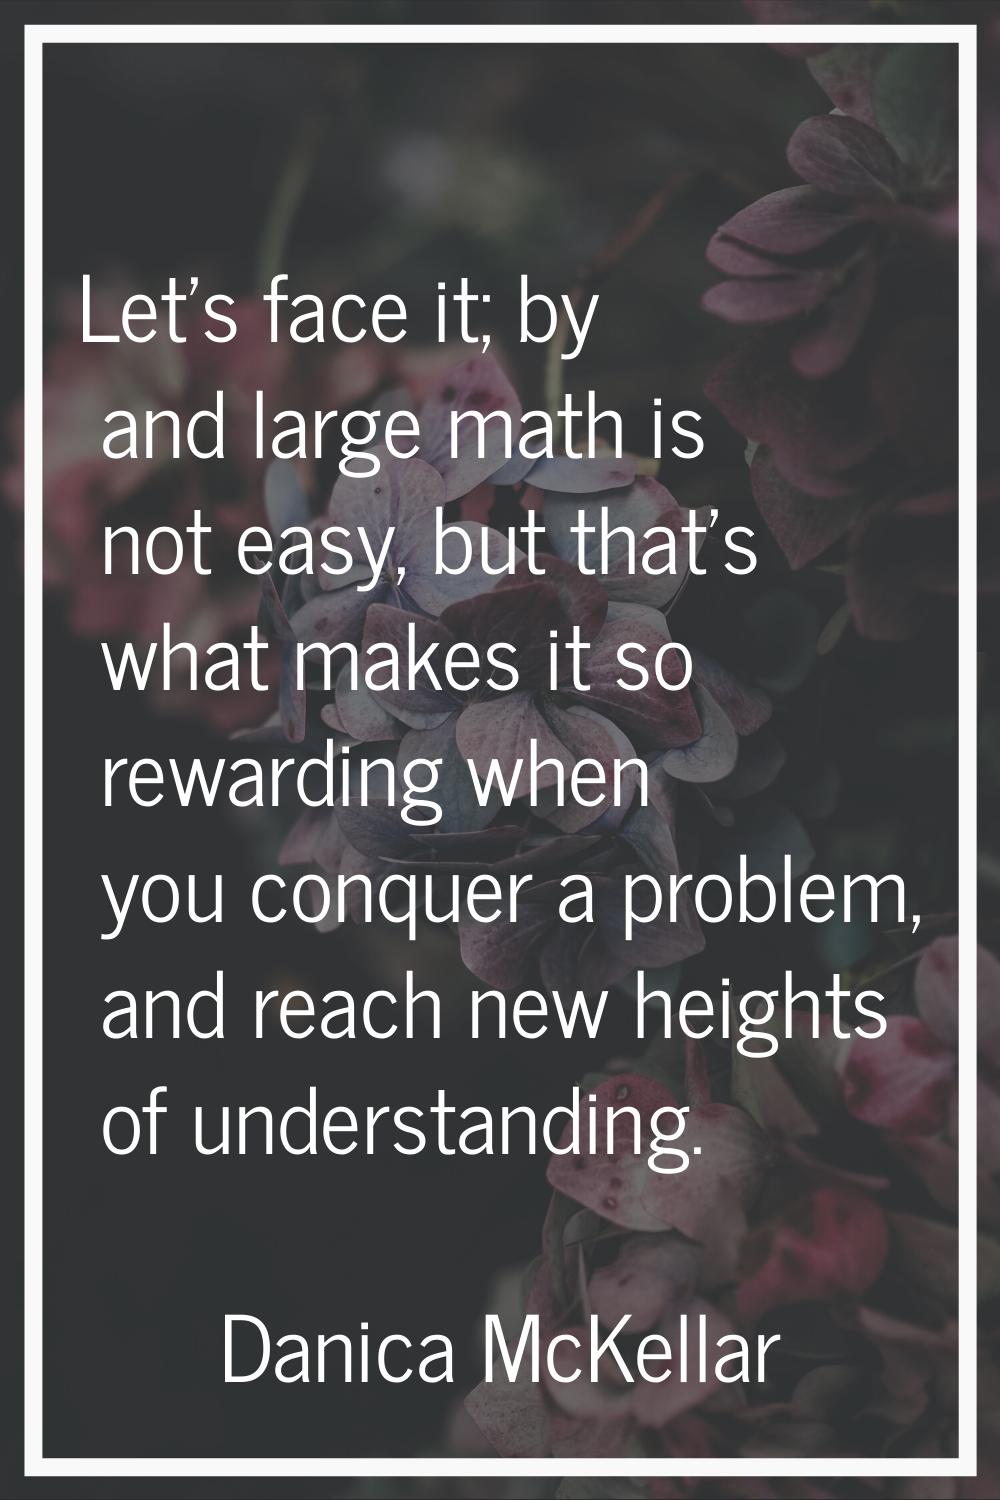 Let's face it; by and large math is not easy, but that's what makes it so rewarding when you conque